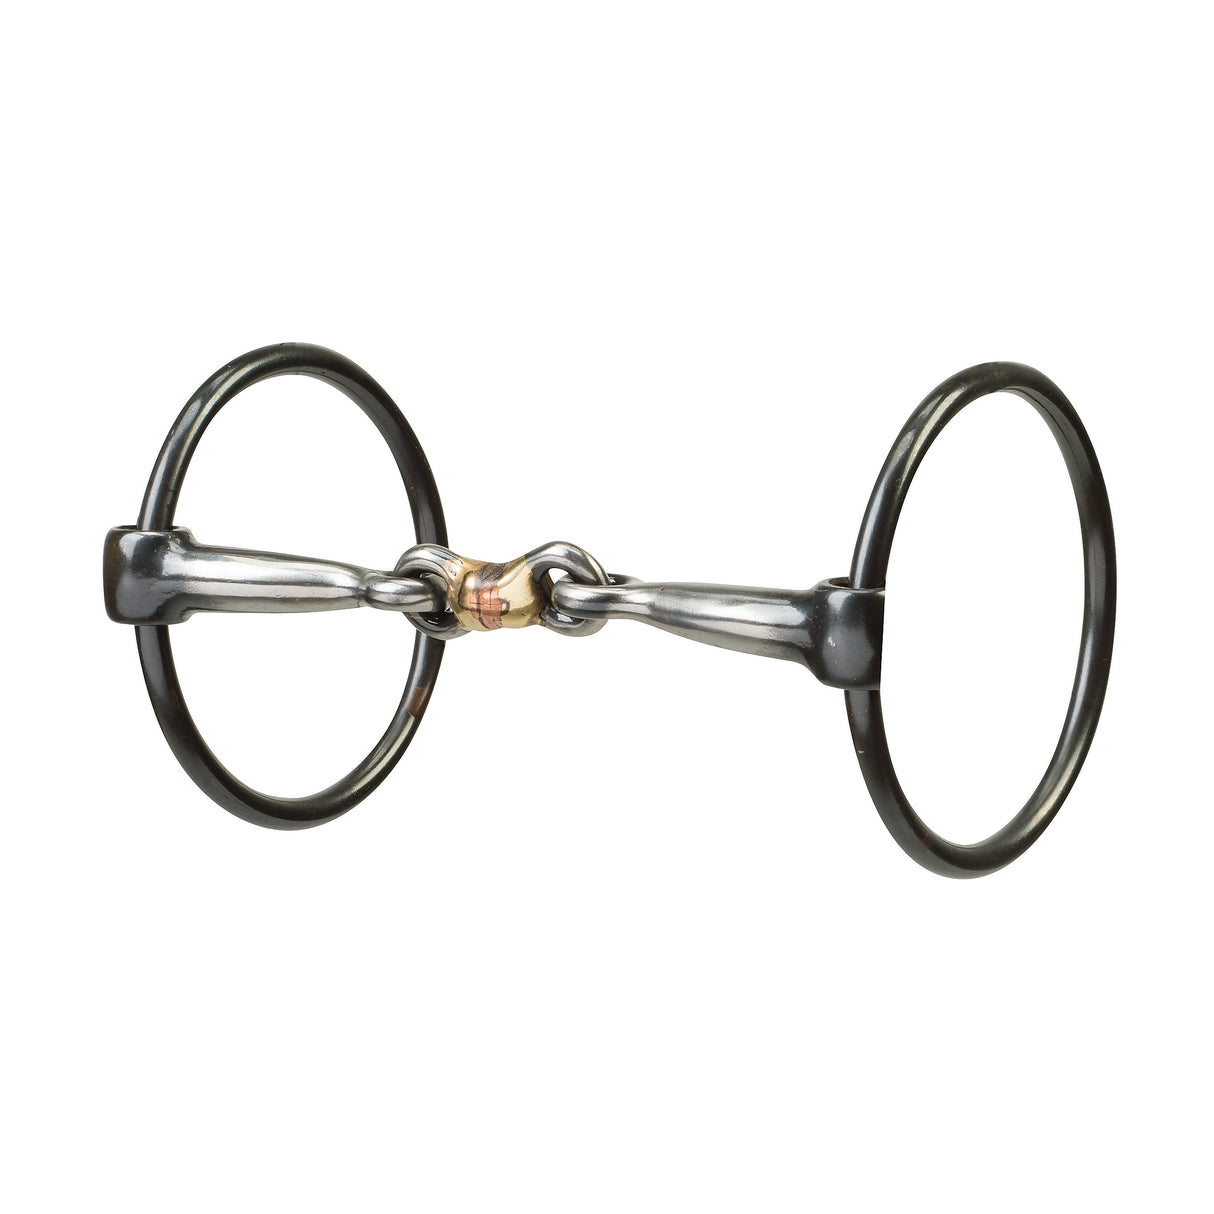 Ring Snaffle Bit with 5" Sweet Iron Dogbone Mouth with